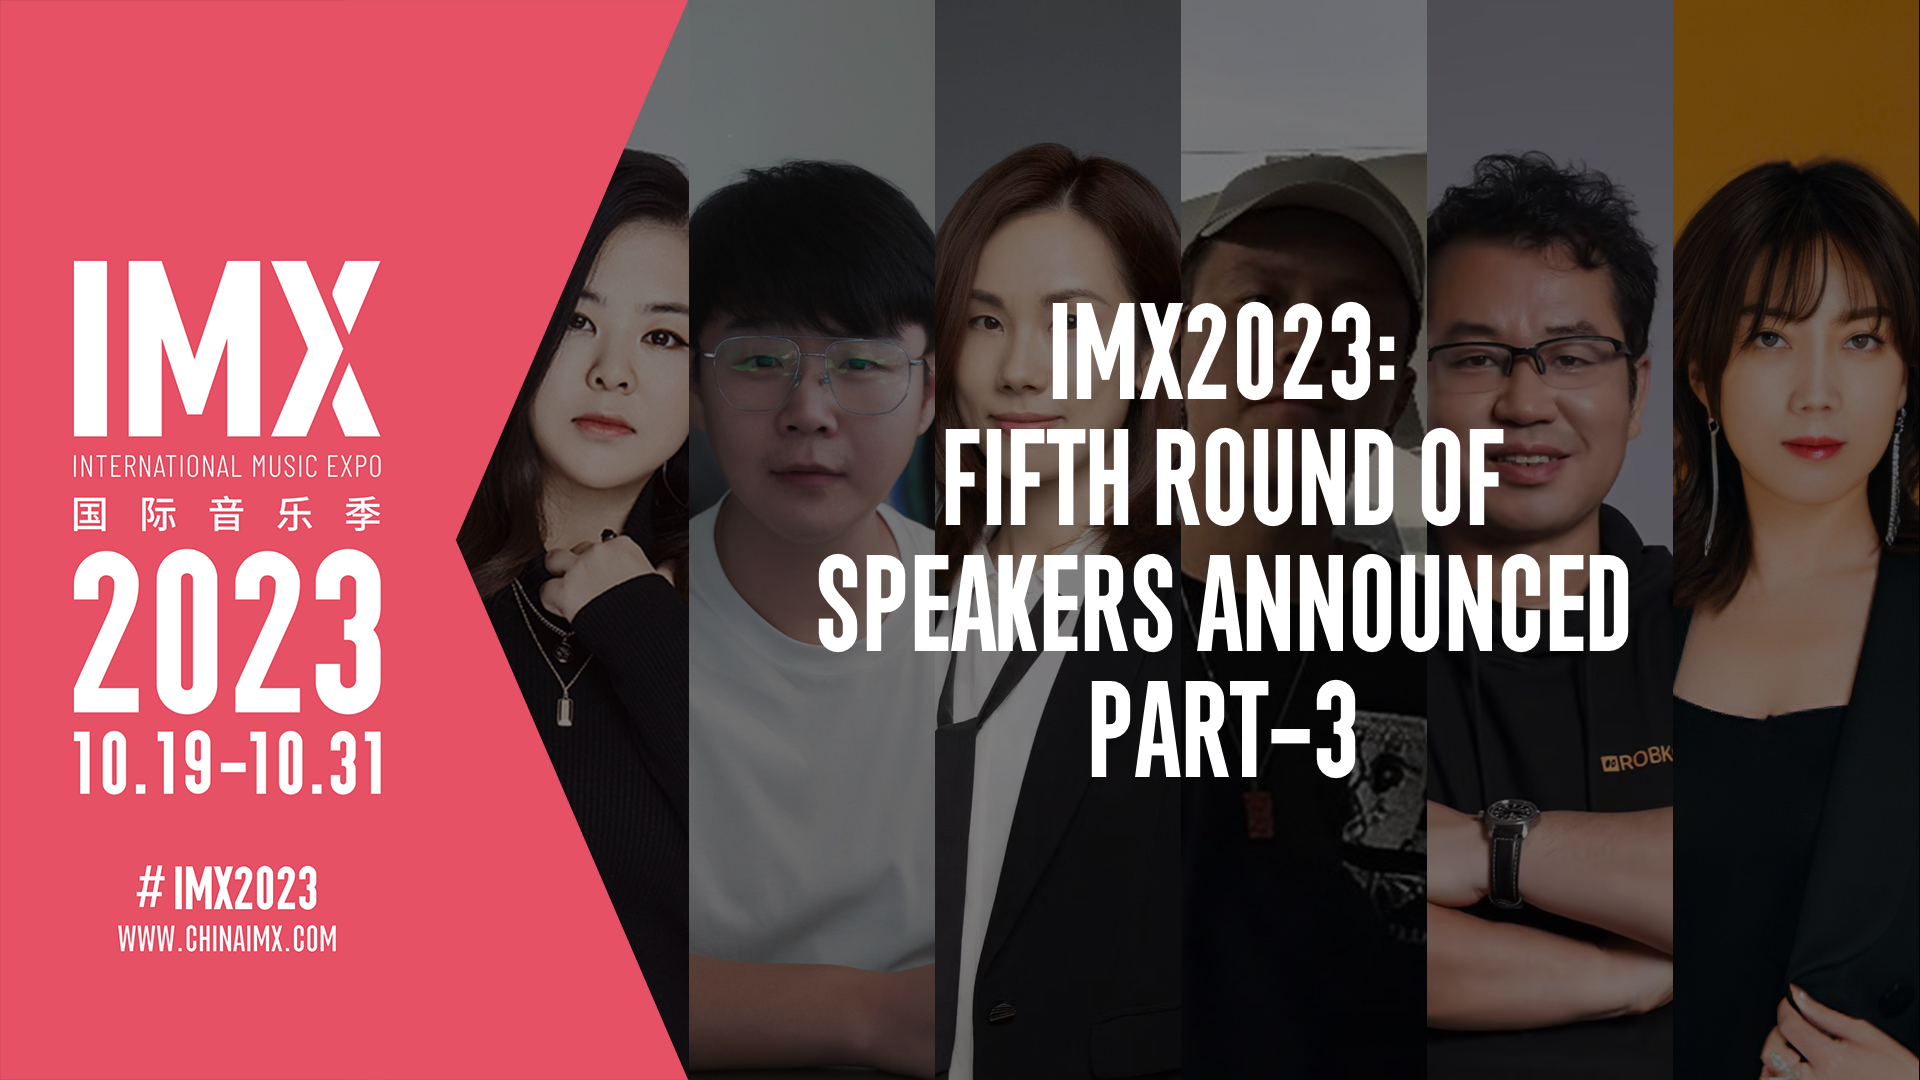 IMX 2023 Fifth Round of Speakers Part 3